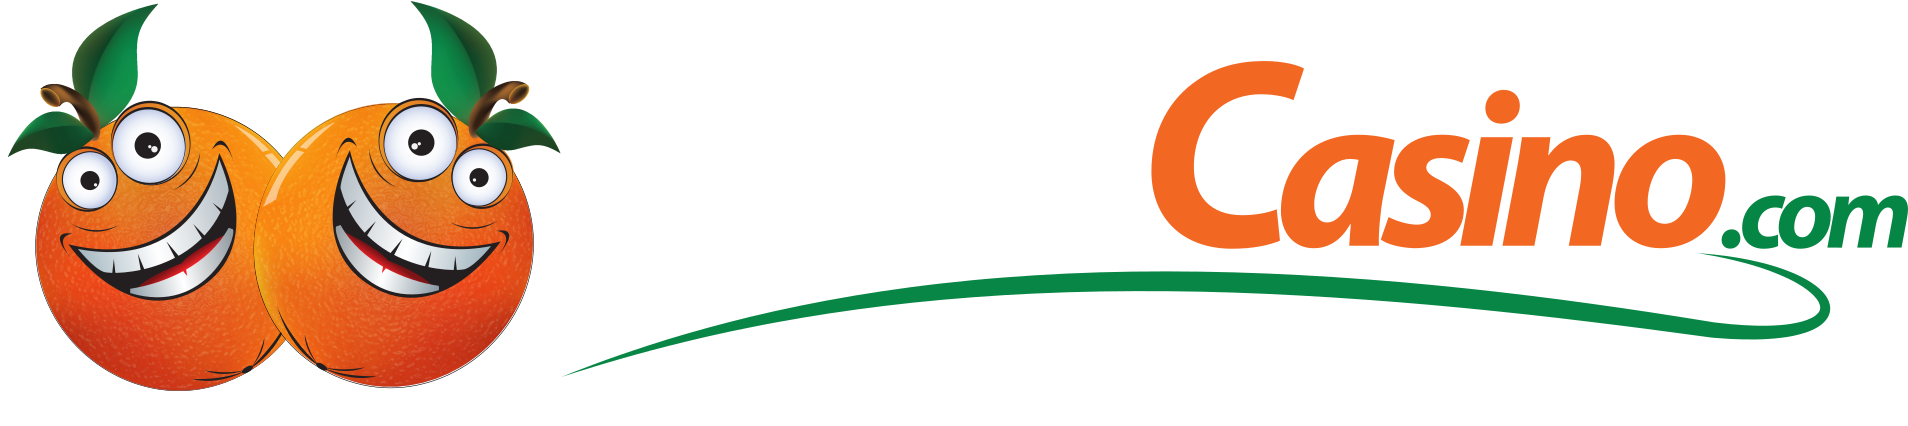 Casino as One of the Tops Casino Websites Listed with free money